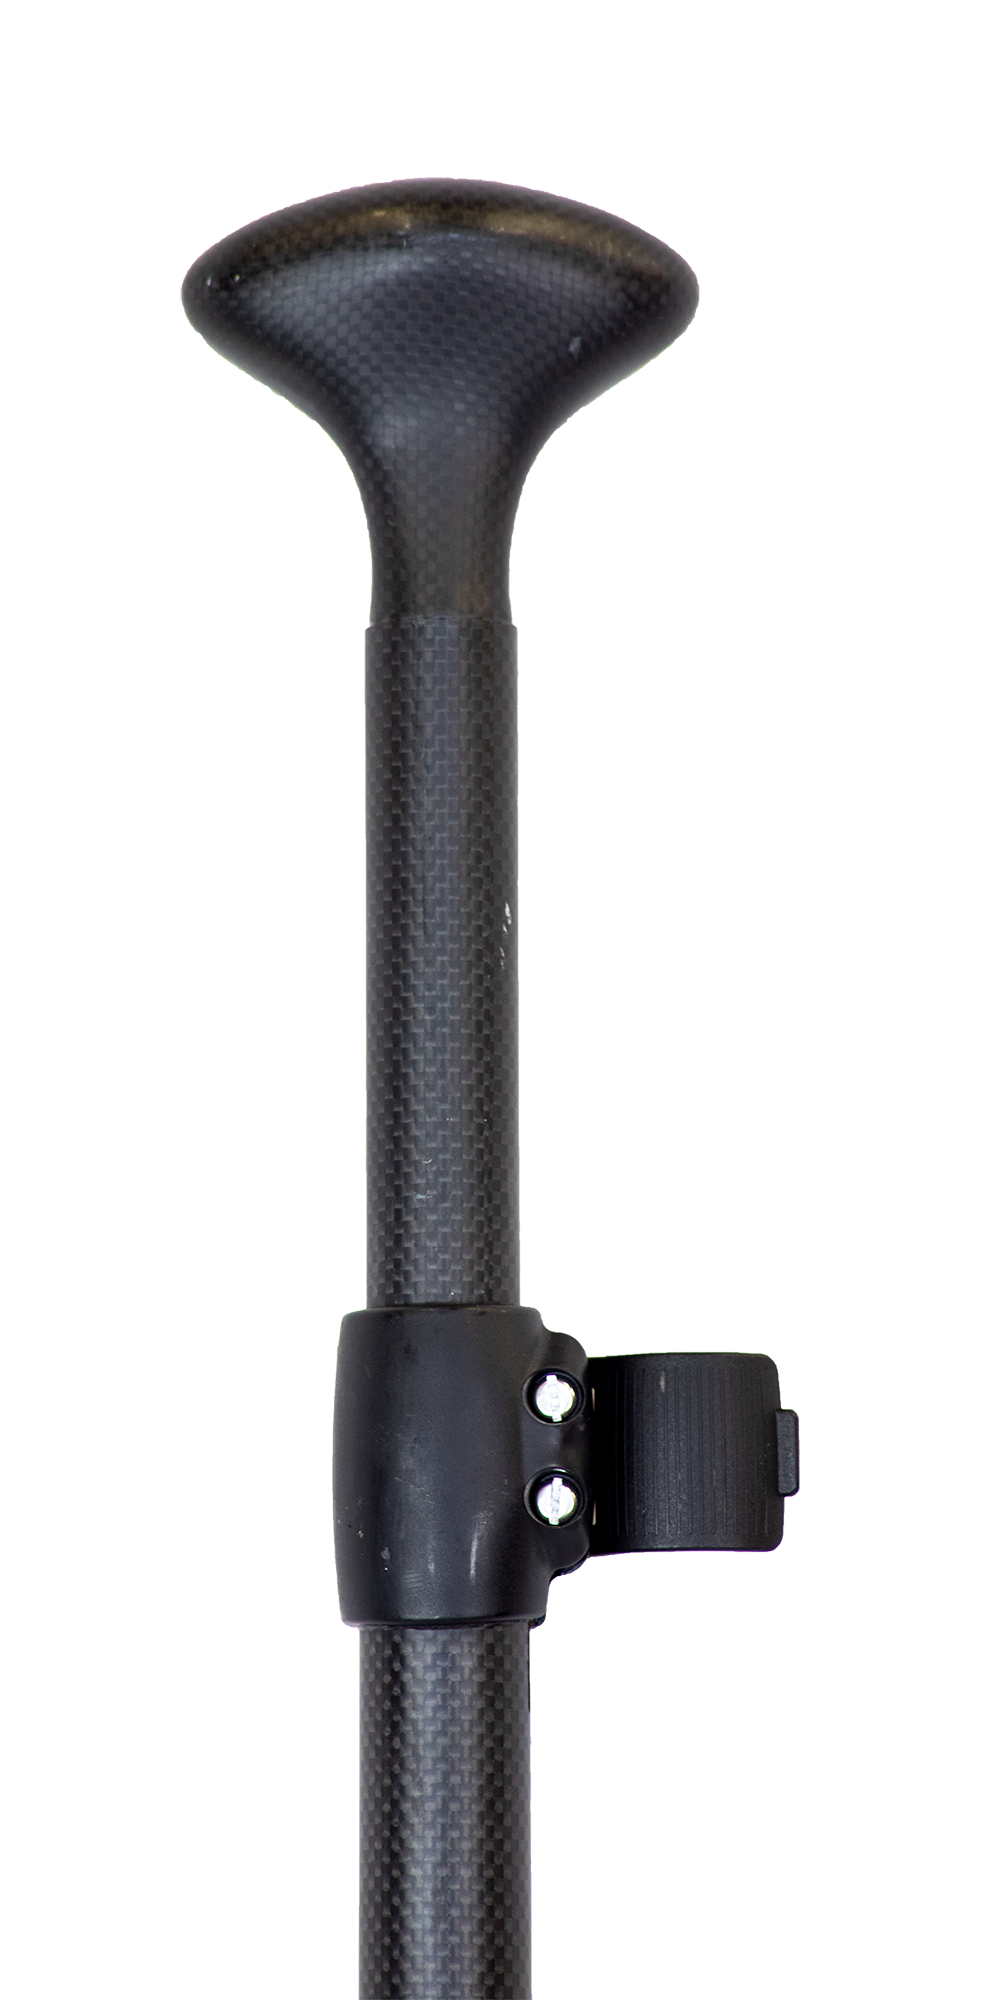 H.S. Pro Carbon Paddle for Paddle Board